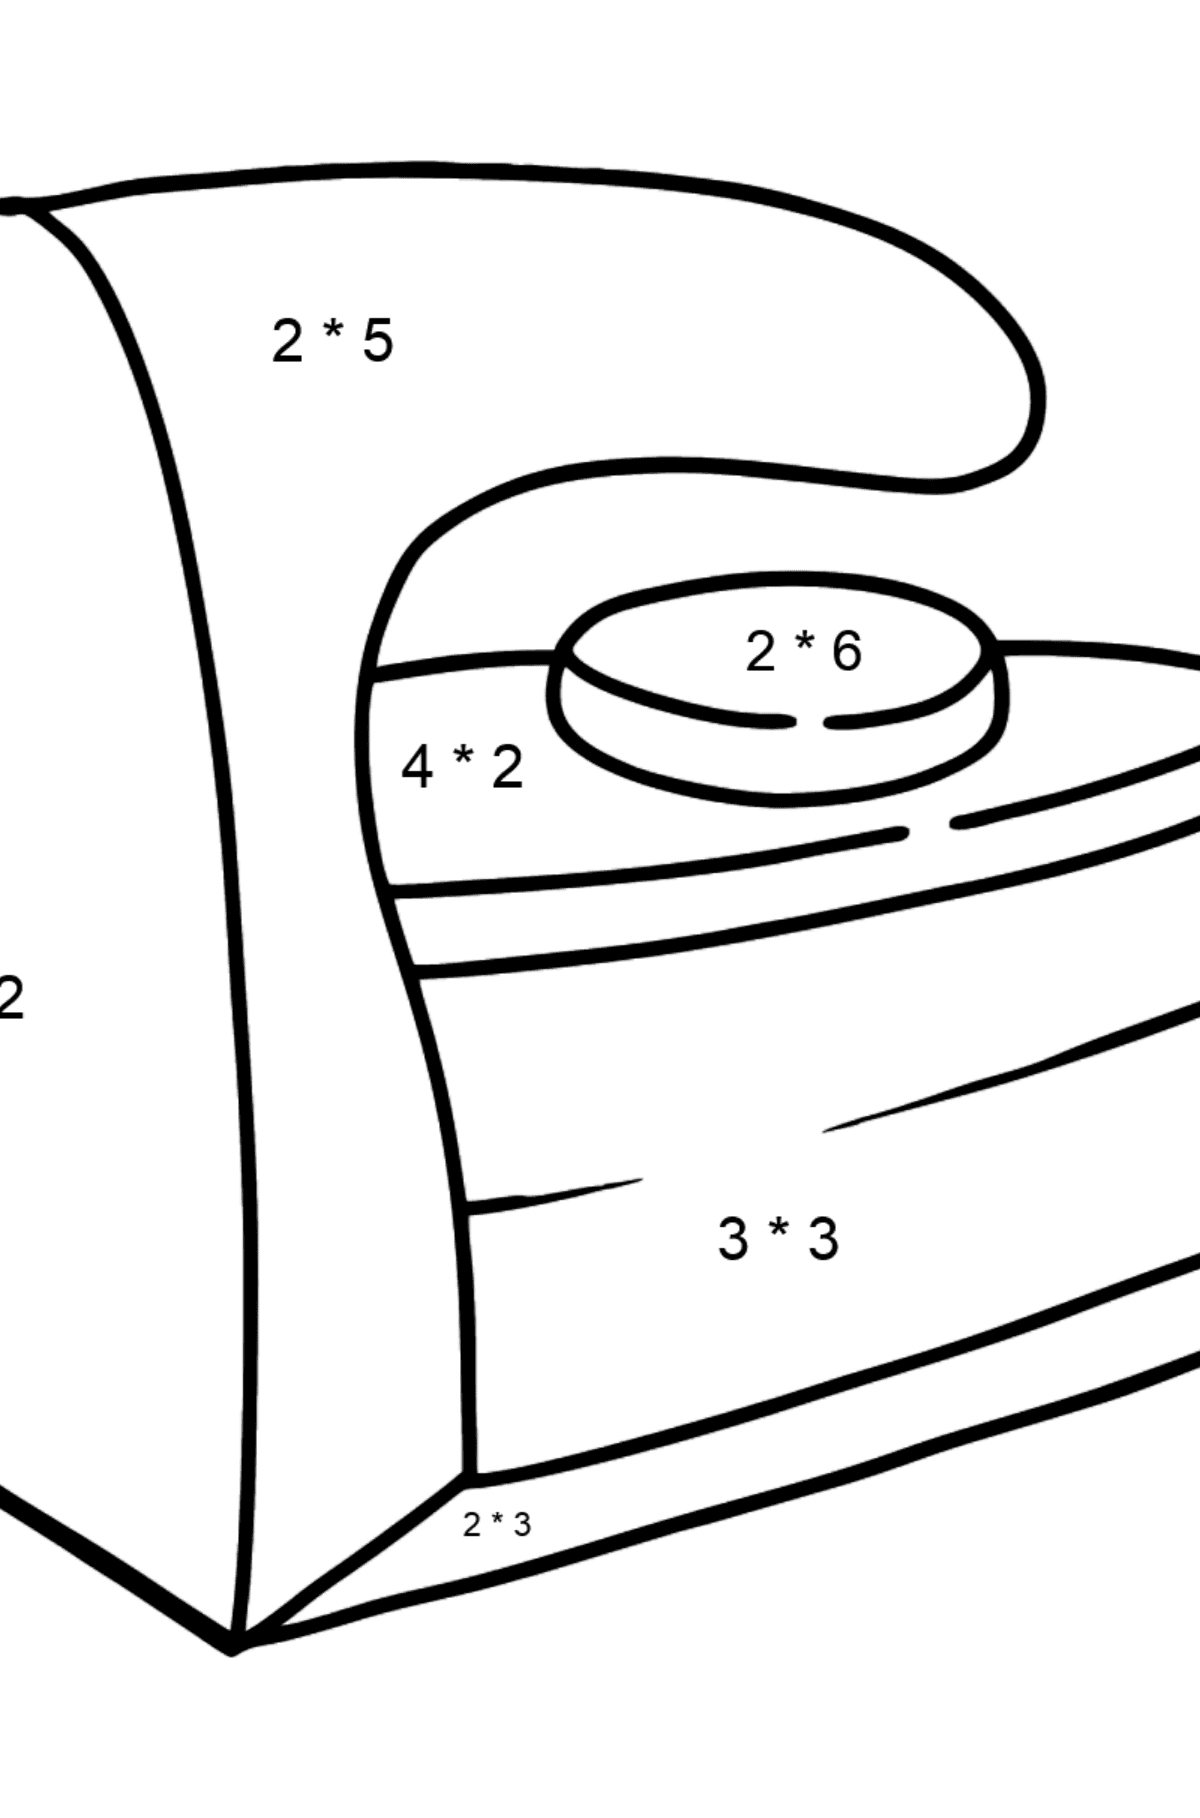 Iron for ironing coloring page - Math Coloring - Multiplication for Kids